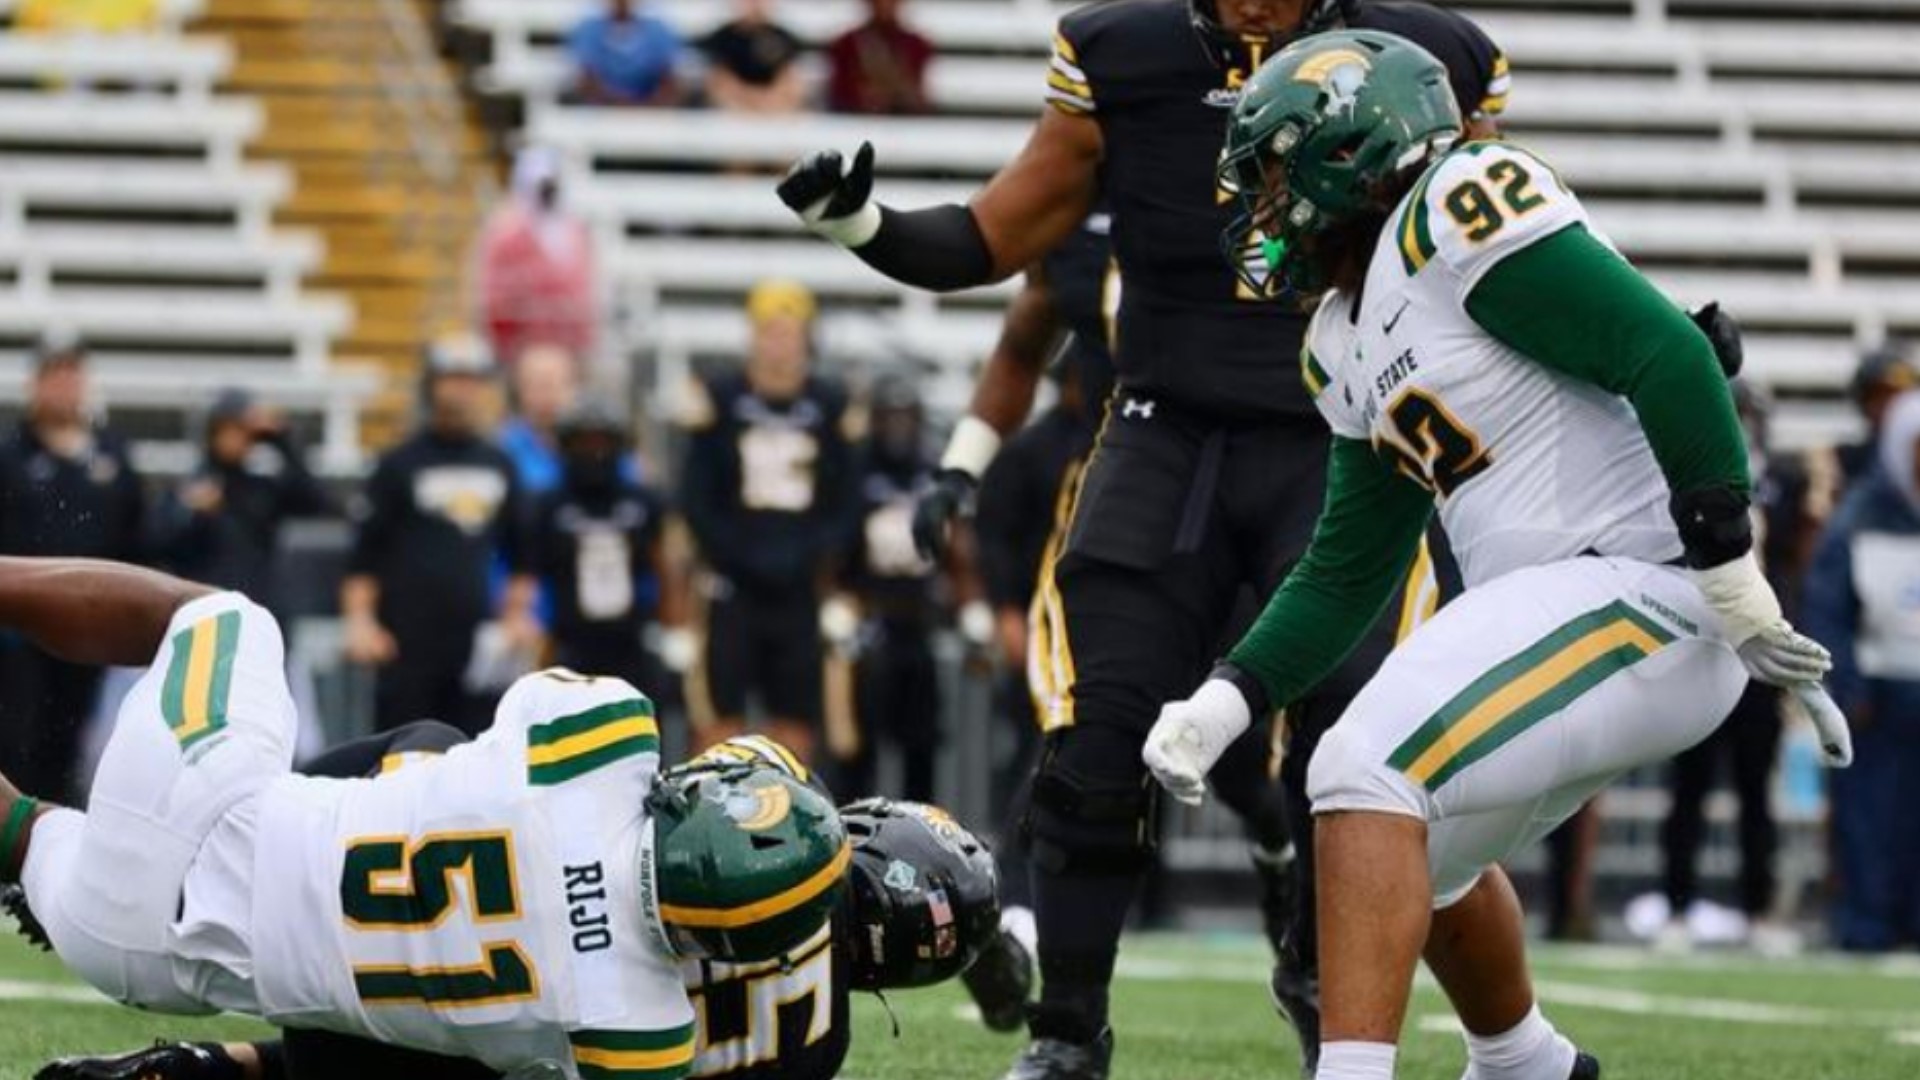 Norfolk State relies on its ground game to beat Towson 21-14 13newsnow